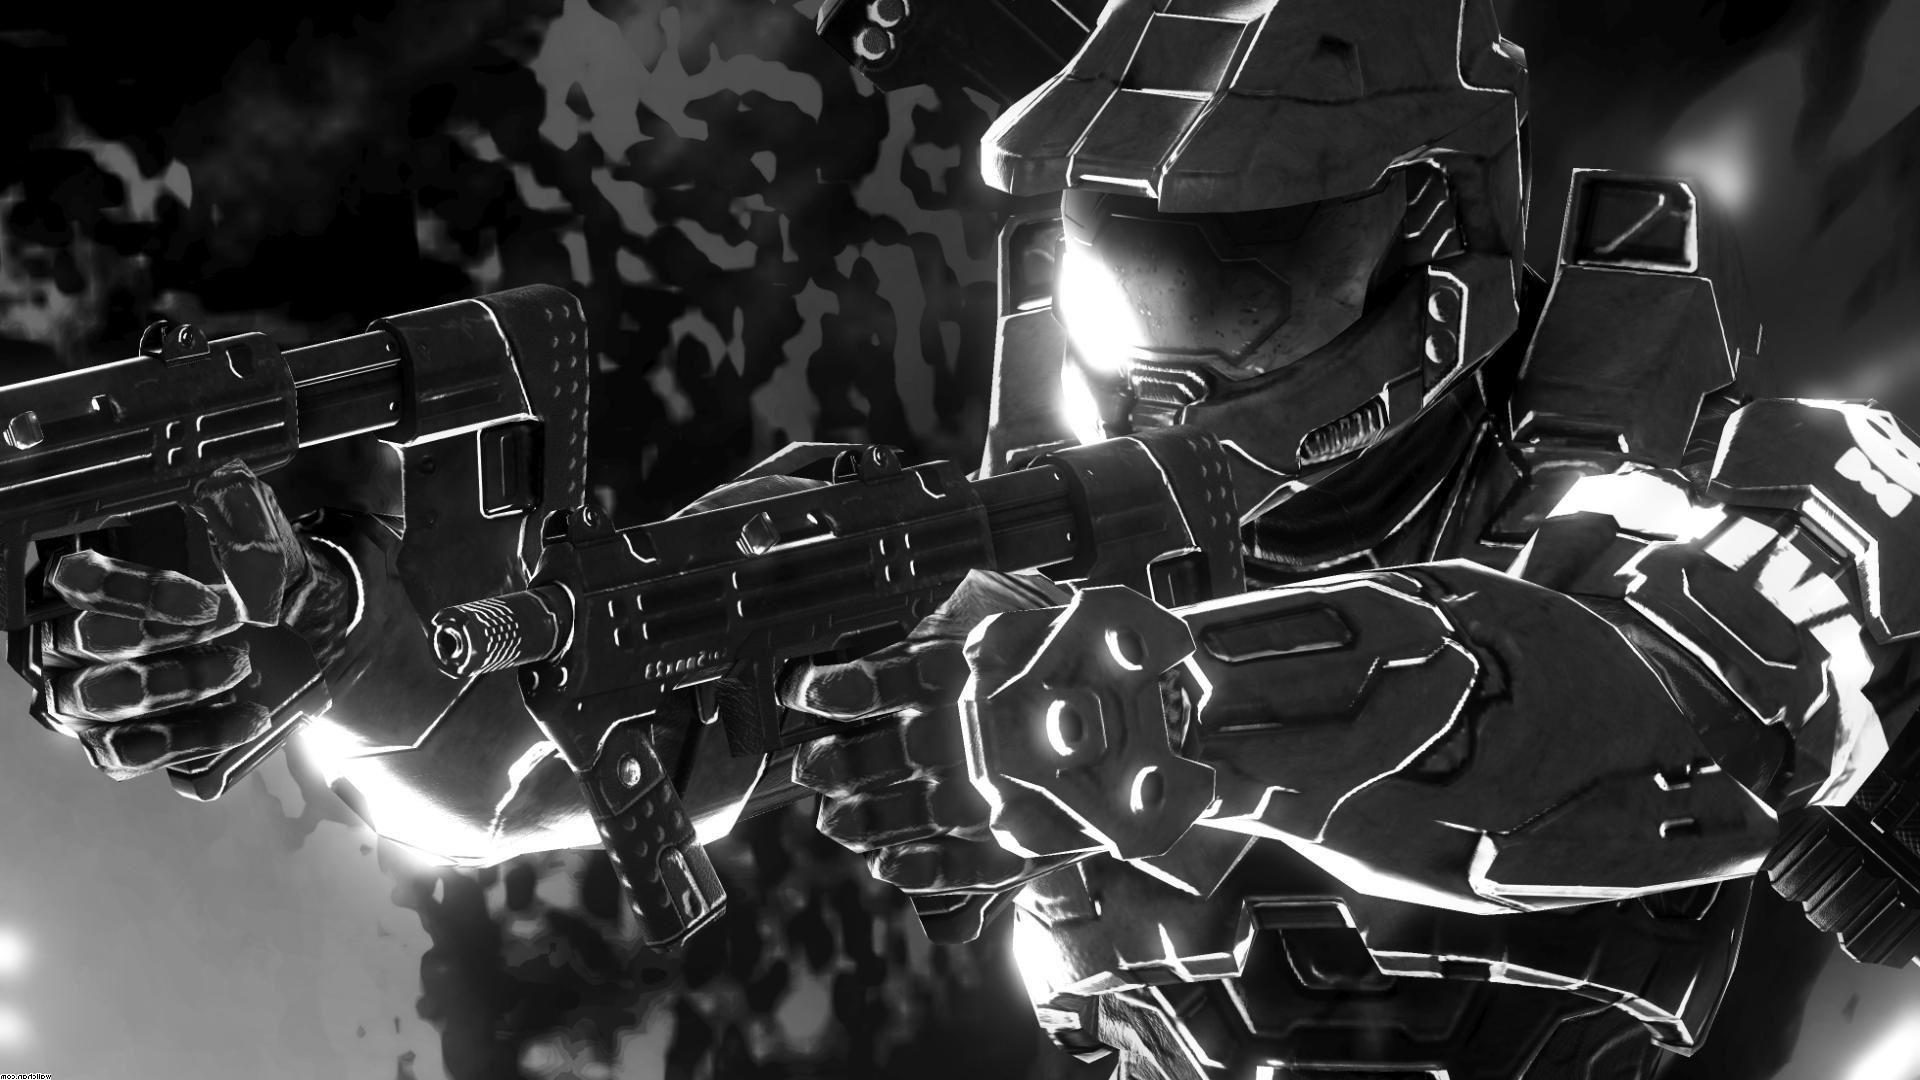 Halo Black and White Wallpapers - Top Free Halo Black and White ...